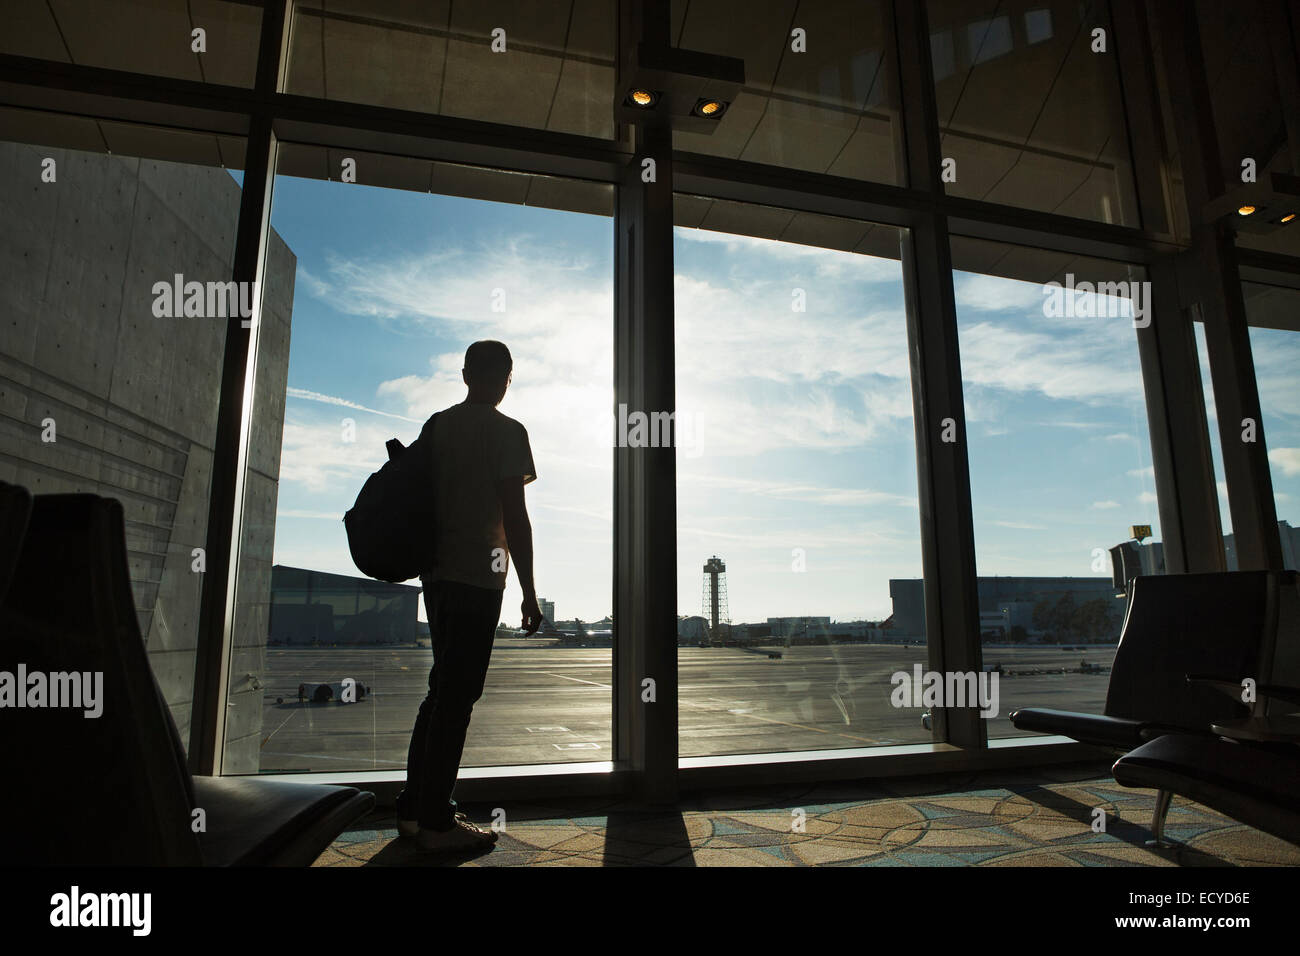 Silhouette of man looking out window airport Banque D'Images